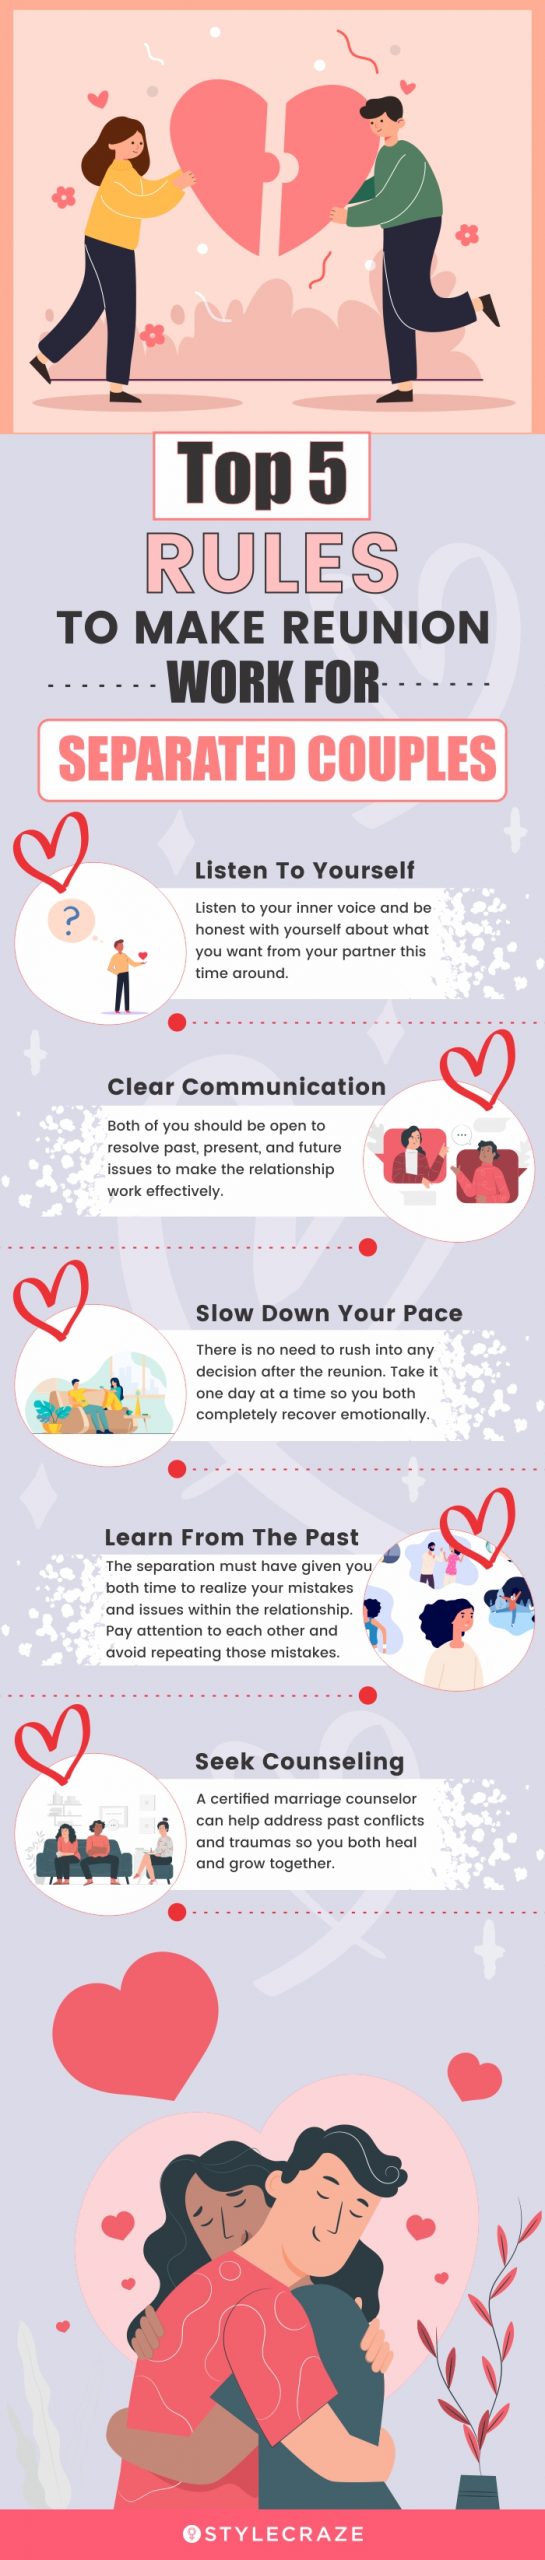 top 5 rules to make reunion work for separated couples (infographic)